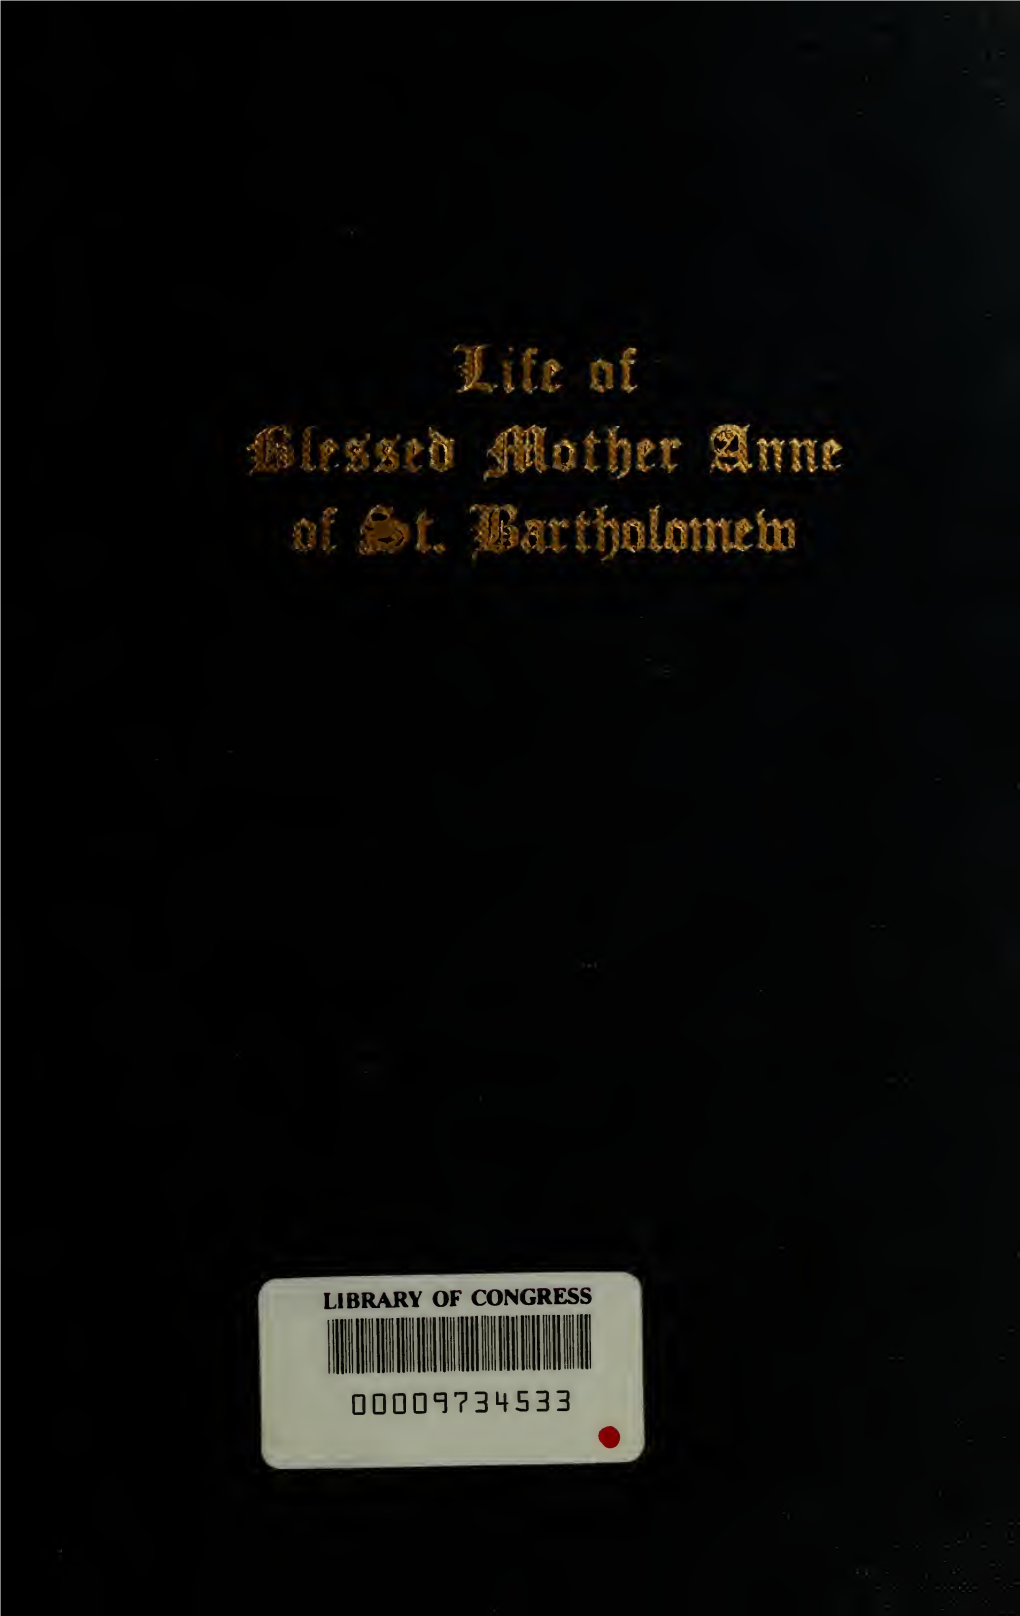 Autobiography of the Blessed Mother Anne of Saint Bartholomew